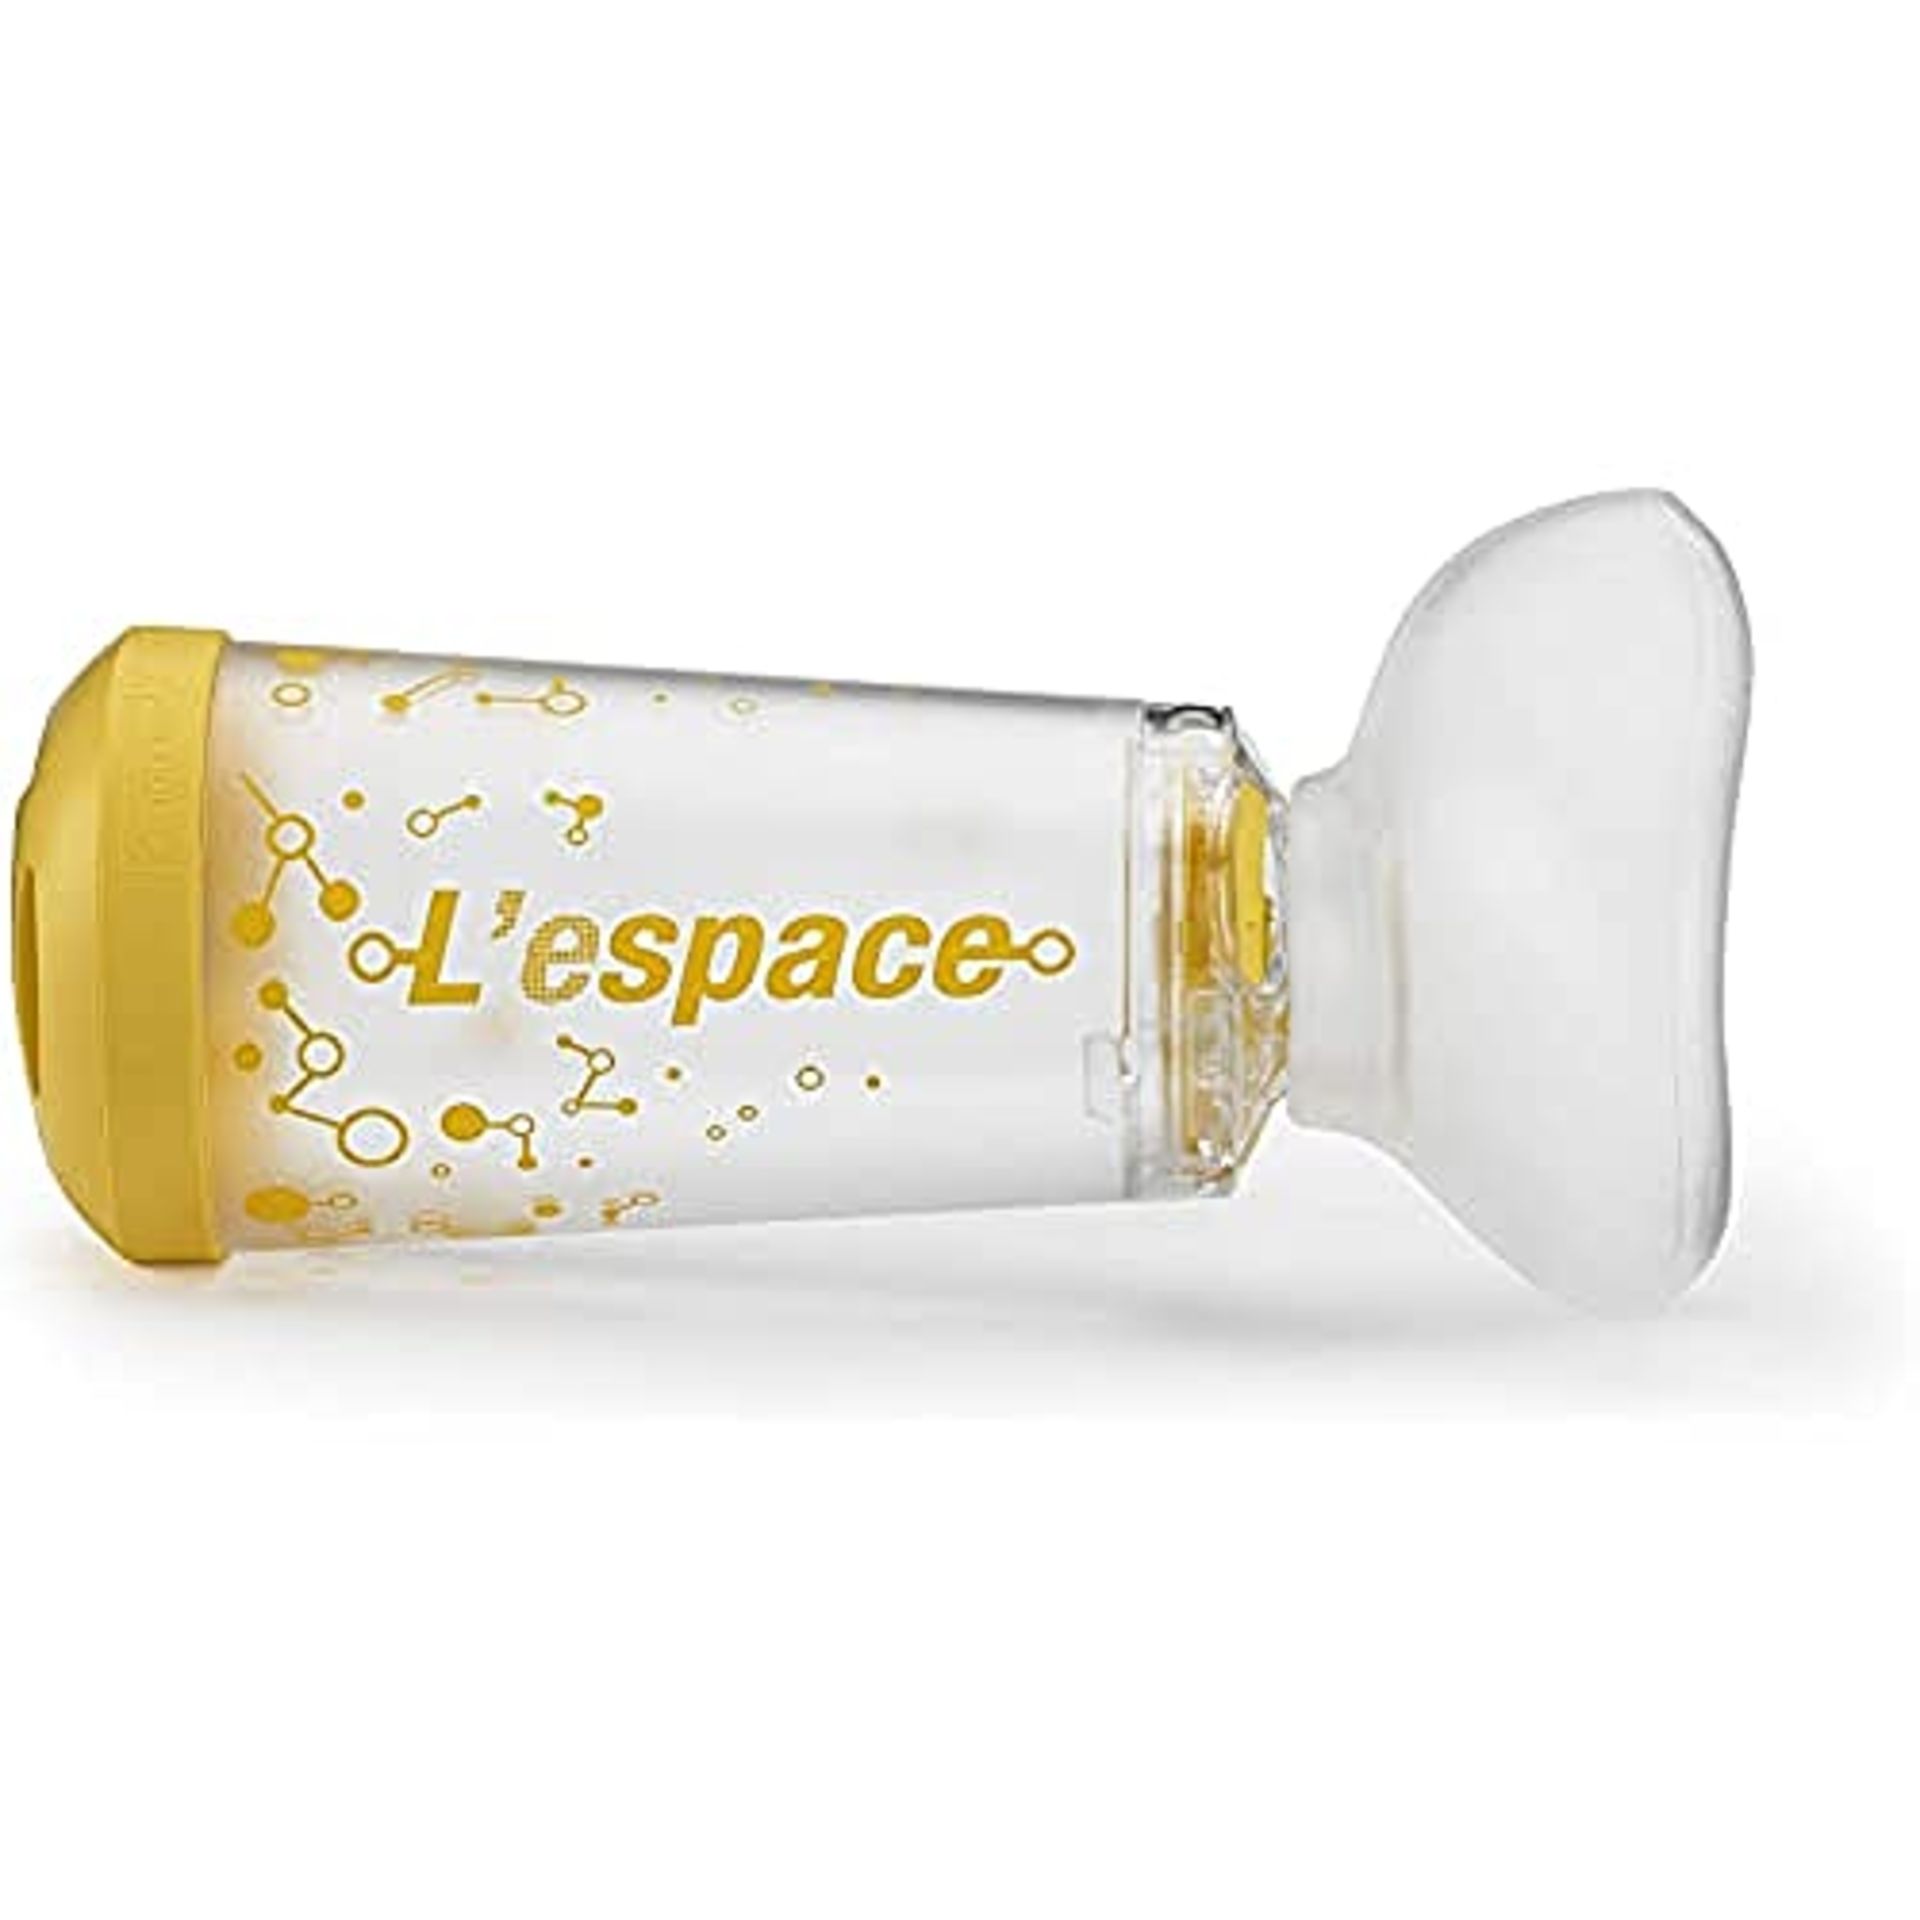 Espace Paediatric Spacer with Yellow mask